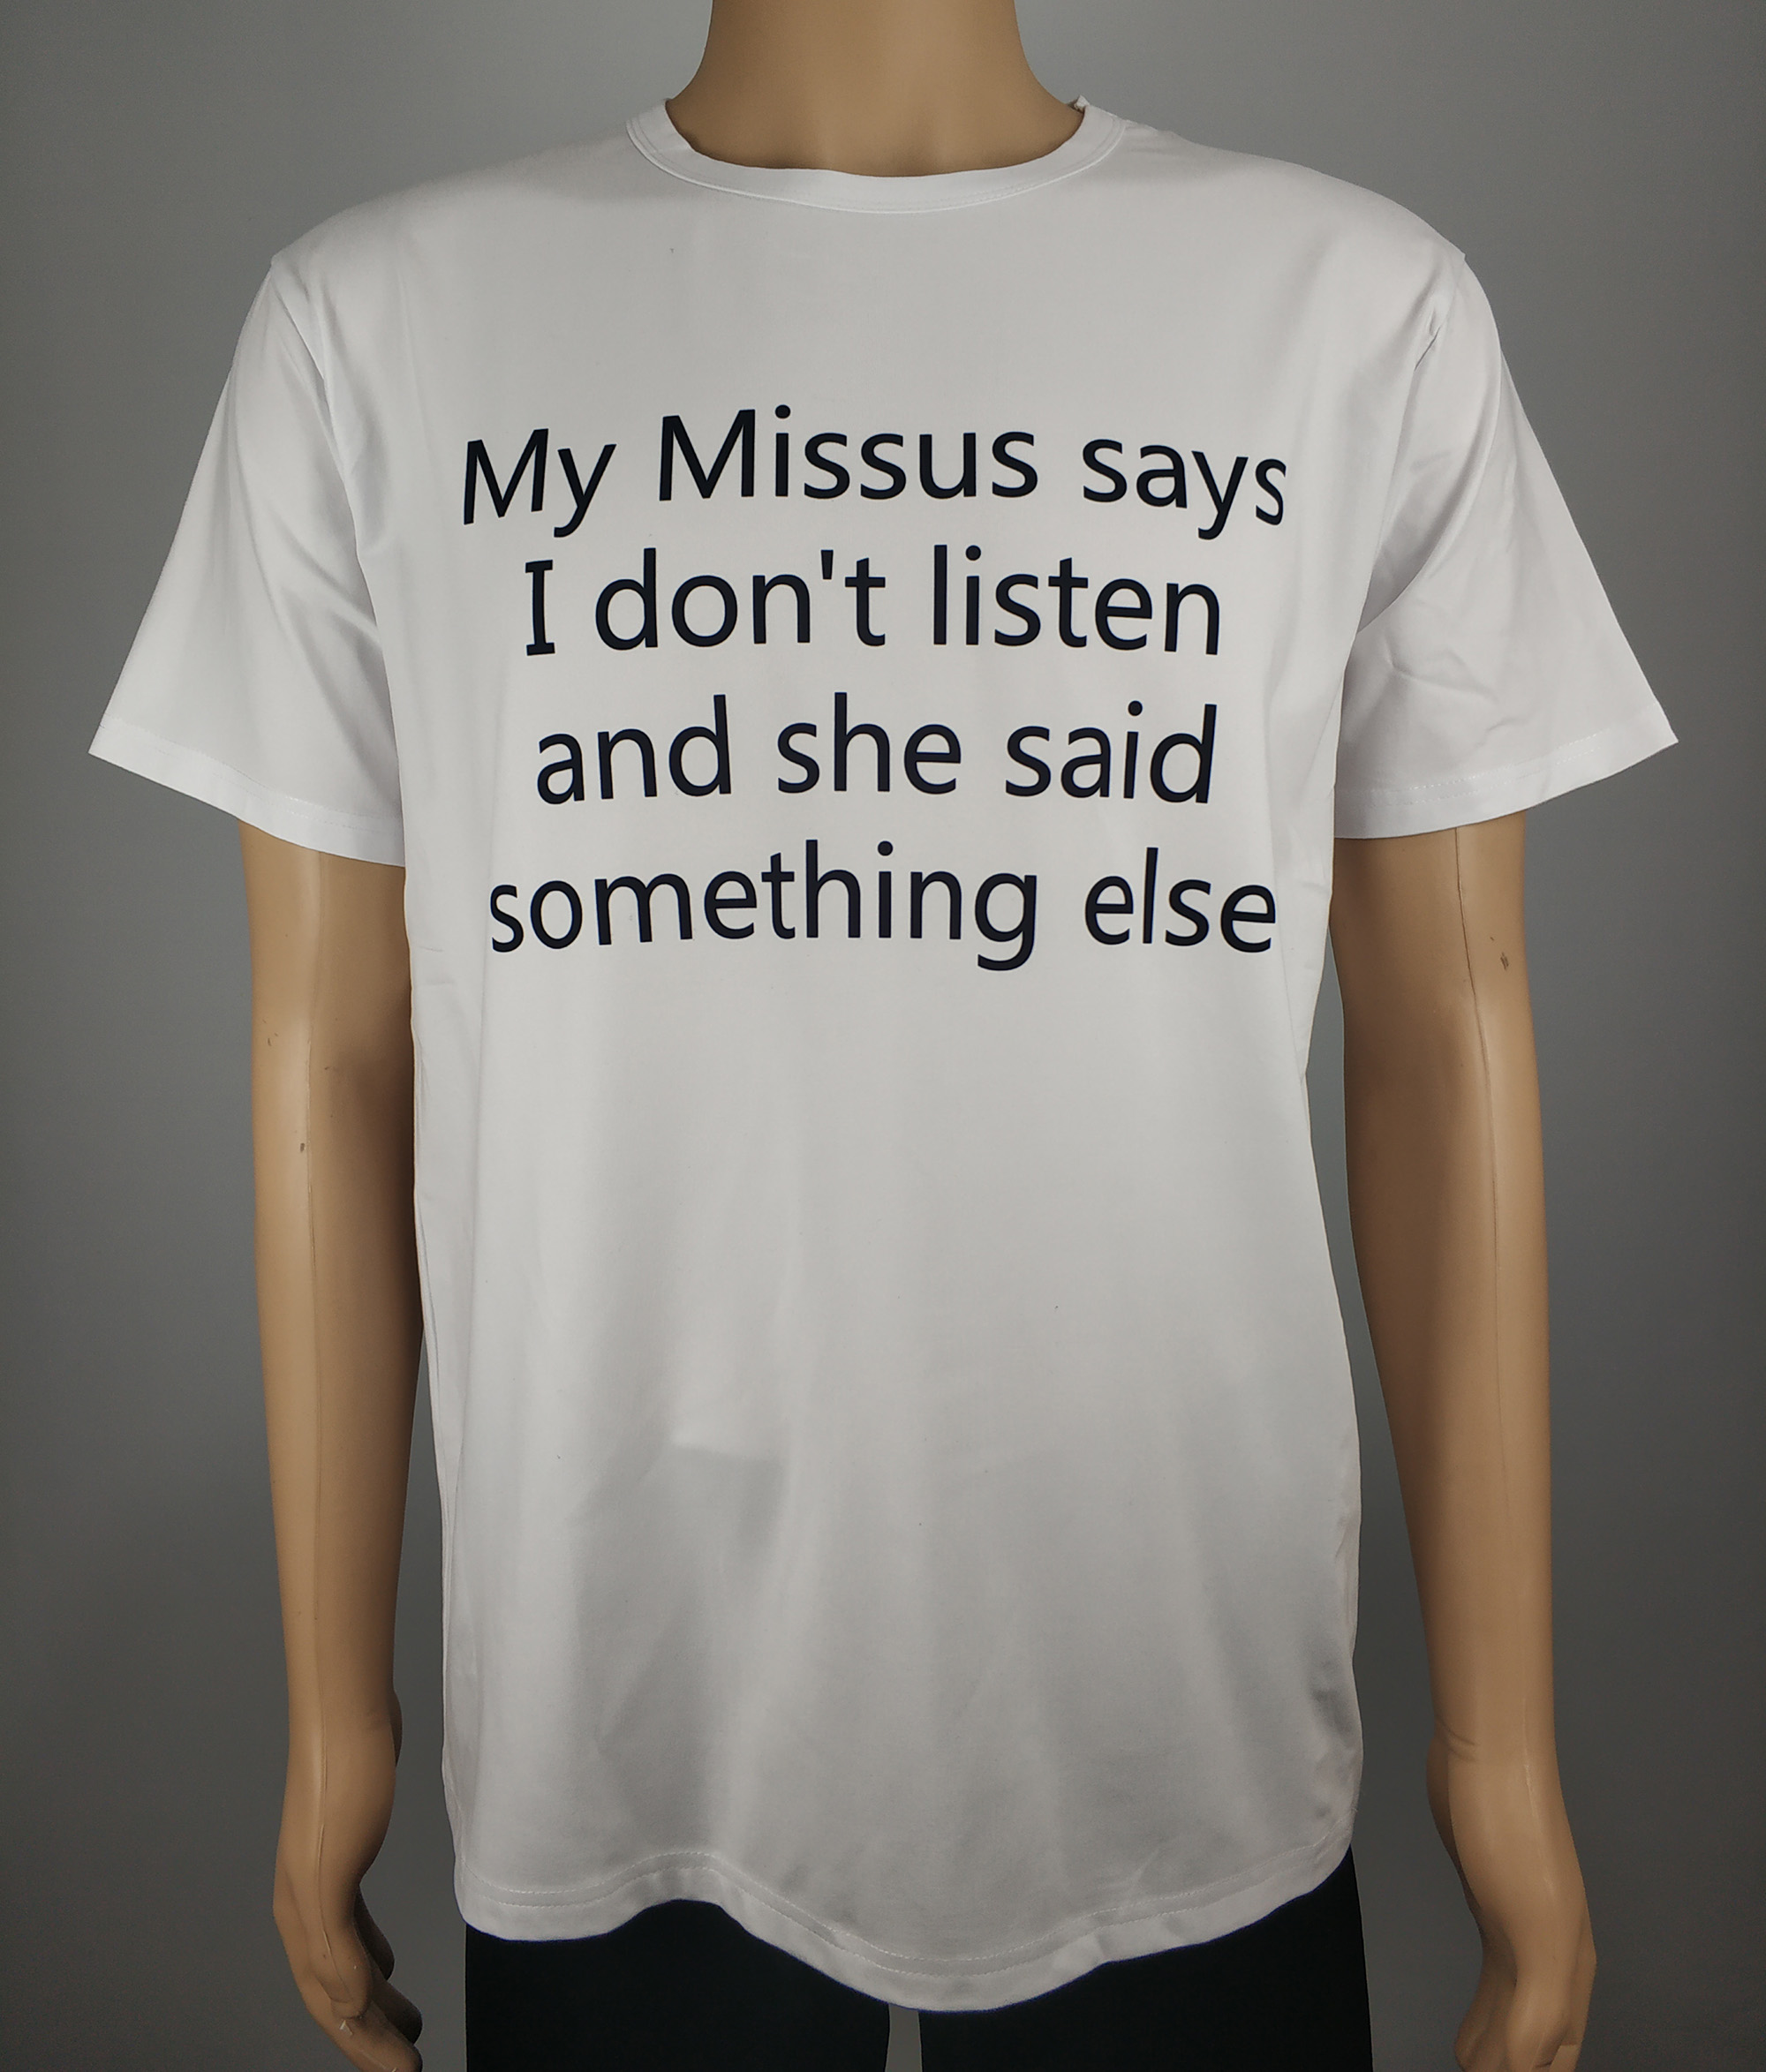 Personalized t-shirt with funy sentence printed 